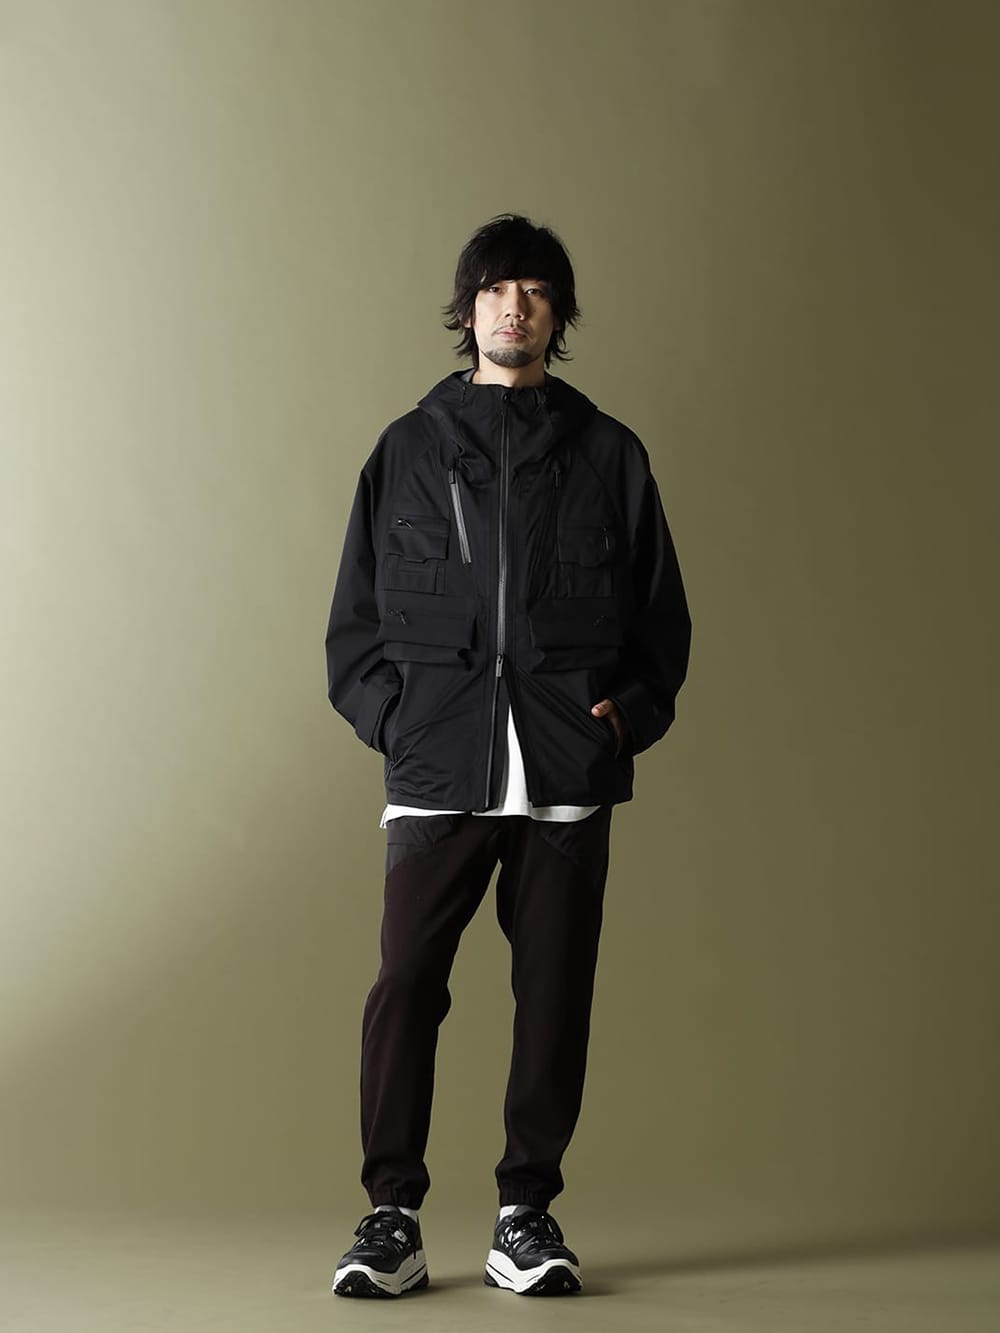 New item from White Mountaineering 2021-22 AW is now in stock